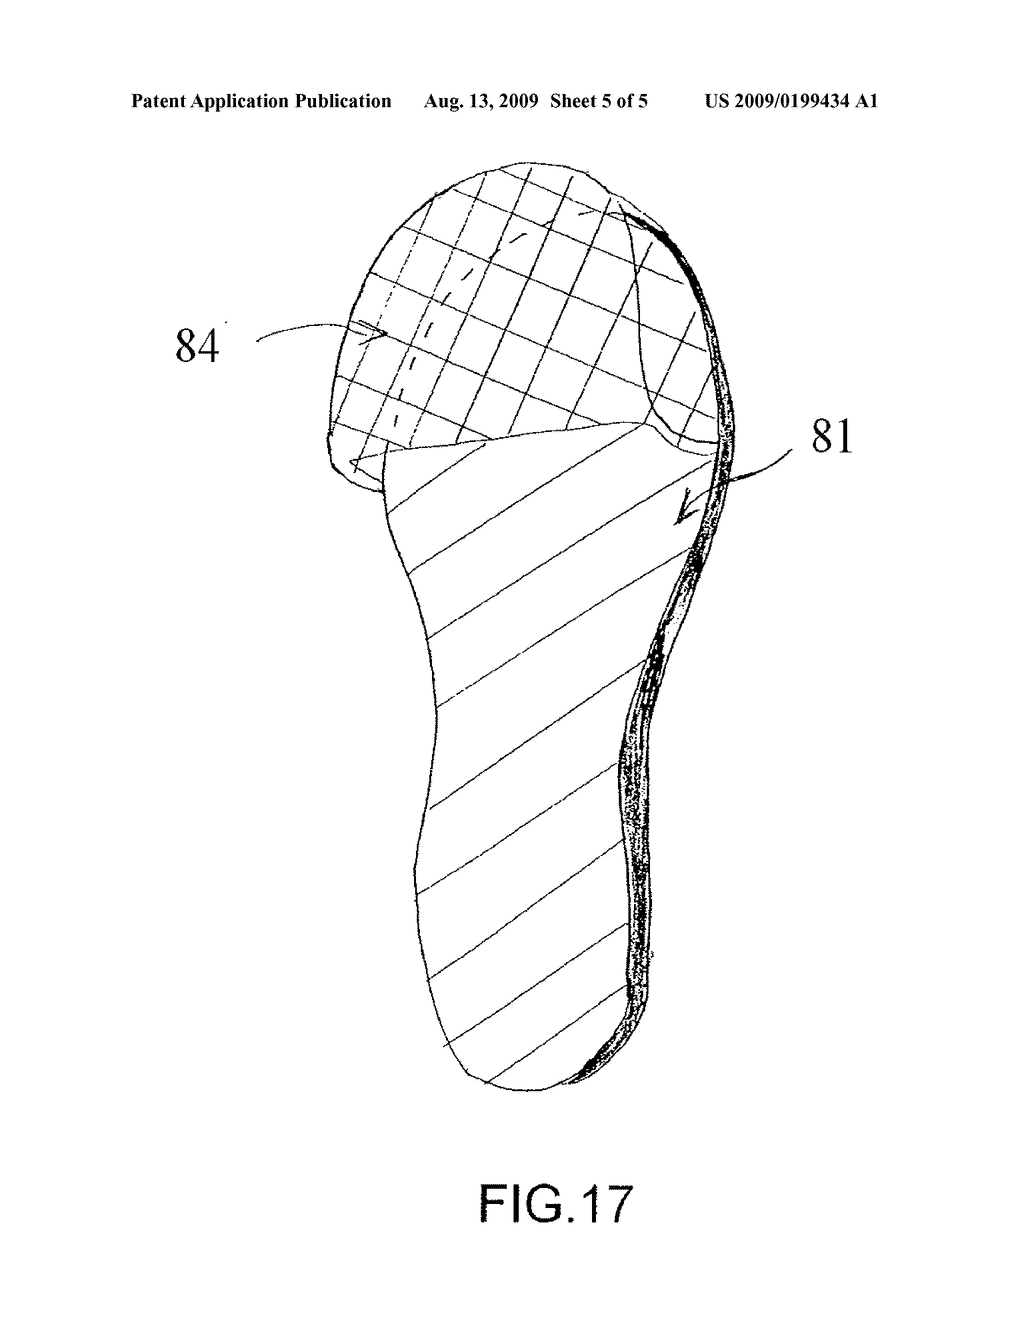 Soccer Shoe Component or Insert Made of One Material and/or a Composite and/or Laminate of One or More Materials for Enhancing the Performance of the Soccer Shoe - diagram, schematic, and image 06